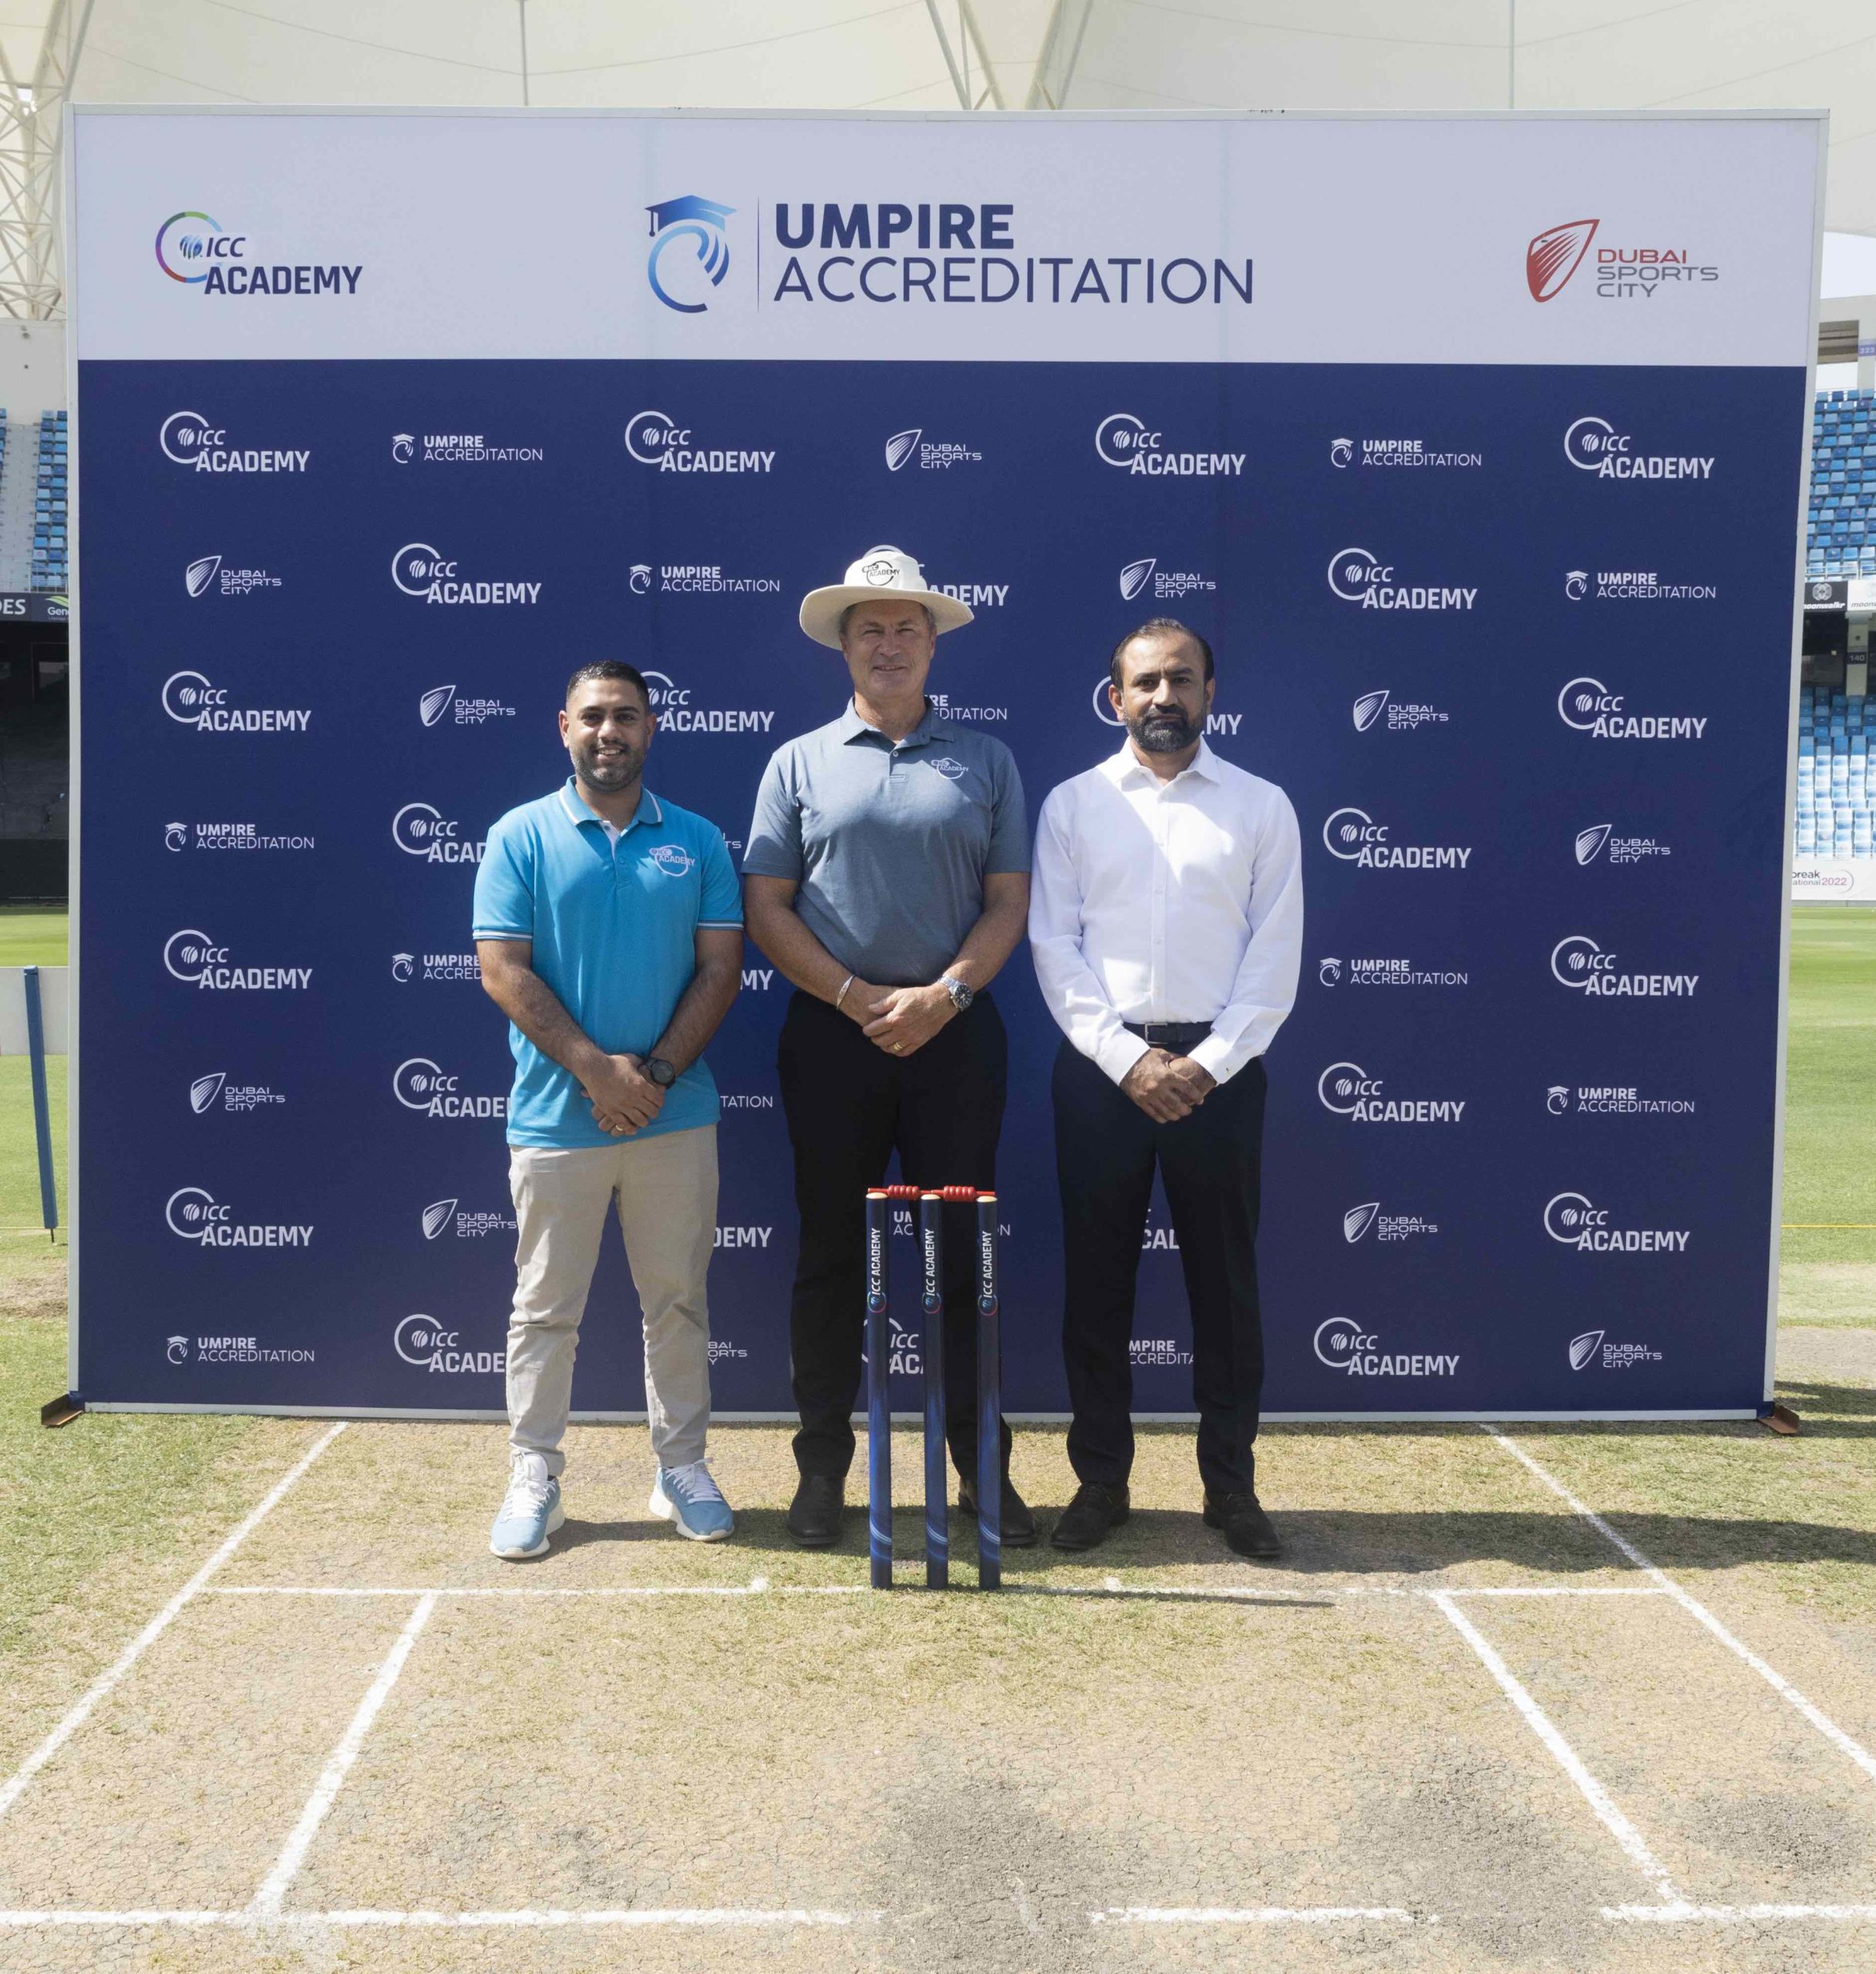 Emirates Cricket Board: ICC Academy and 5-time ICC Umpire of the year, Simon Taufel, officially launch ‘ICC Academy Umpire Accreditation Program